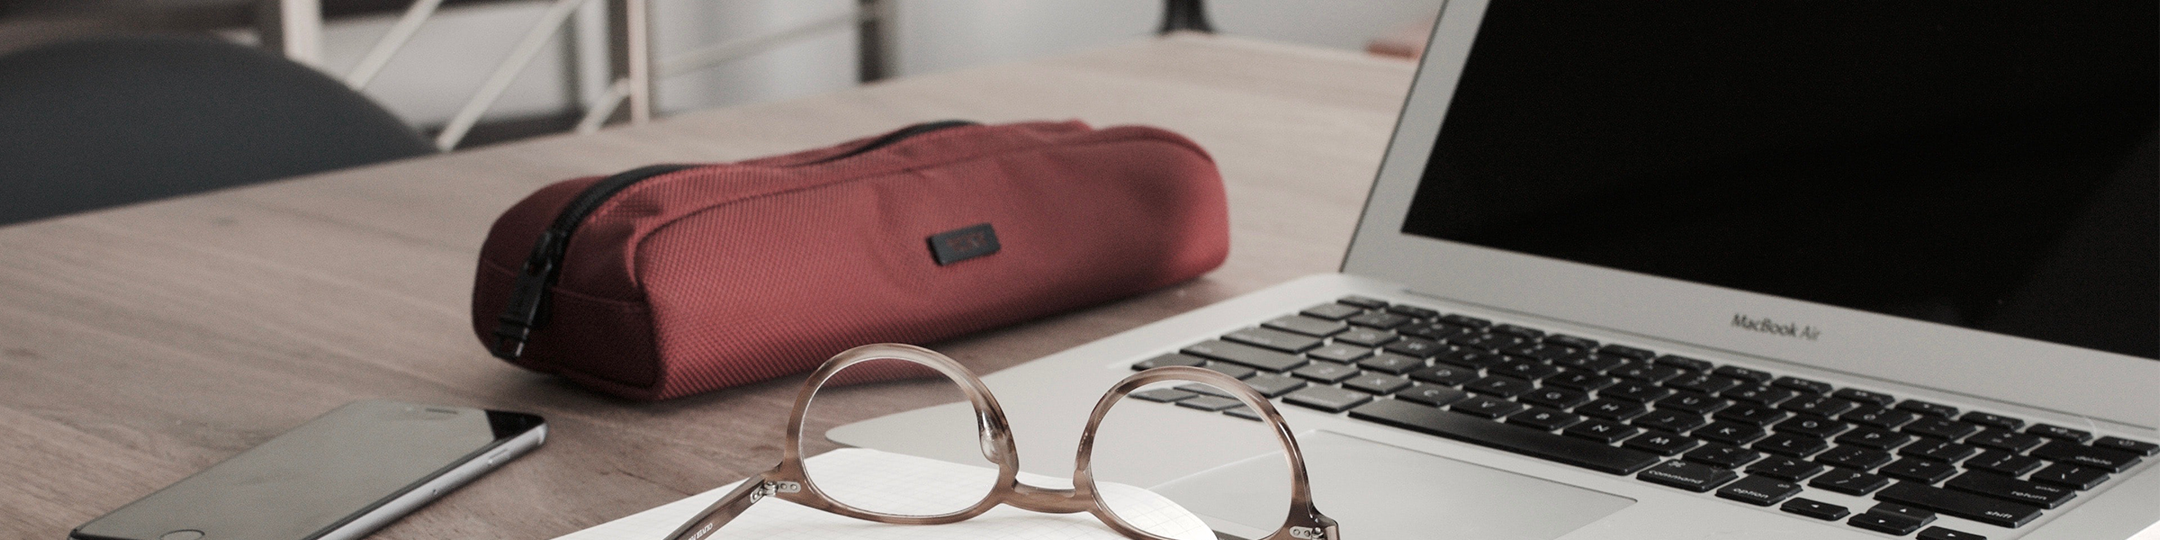 angled photo of a laptop, glasses, phone, and a red pencil holder on a desk